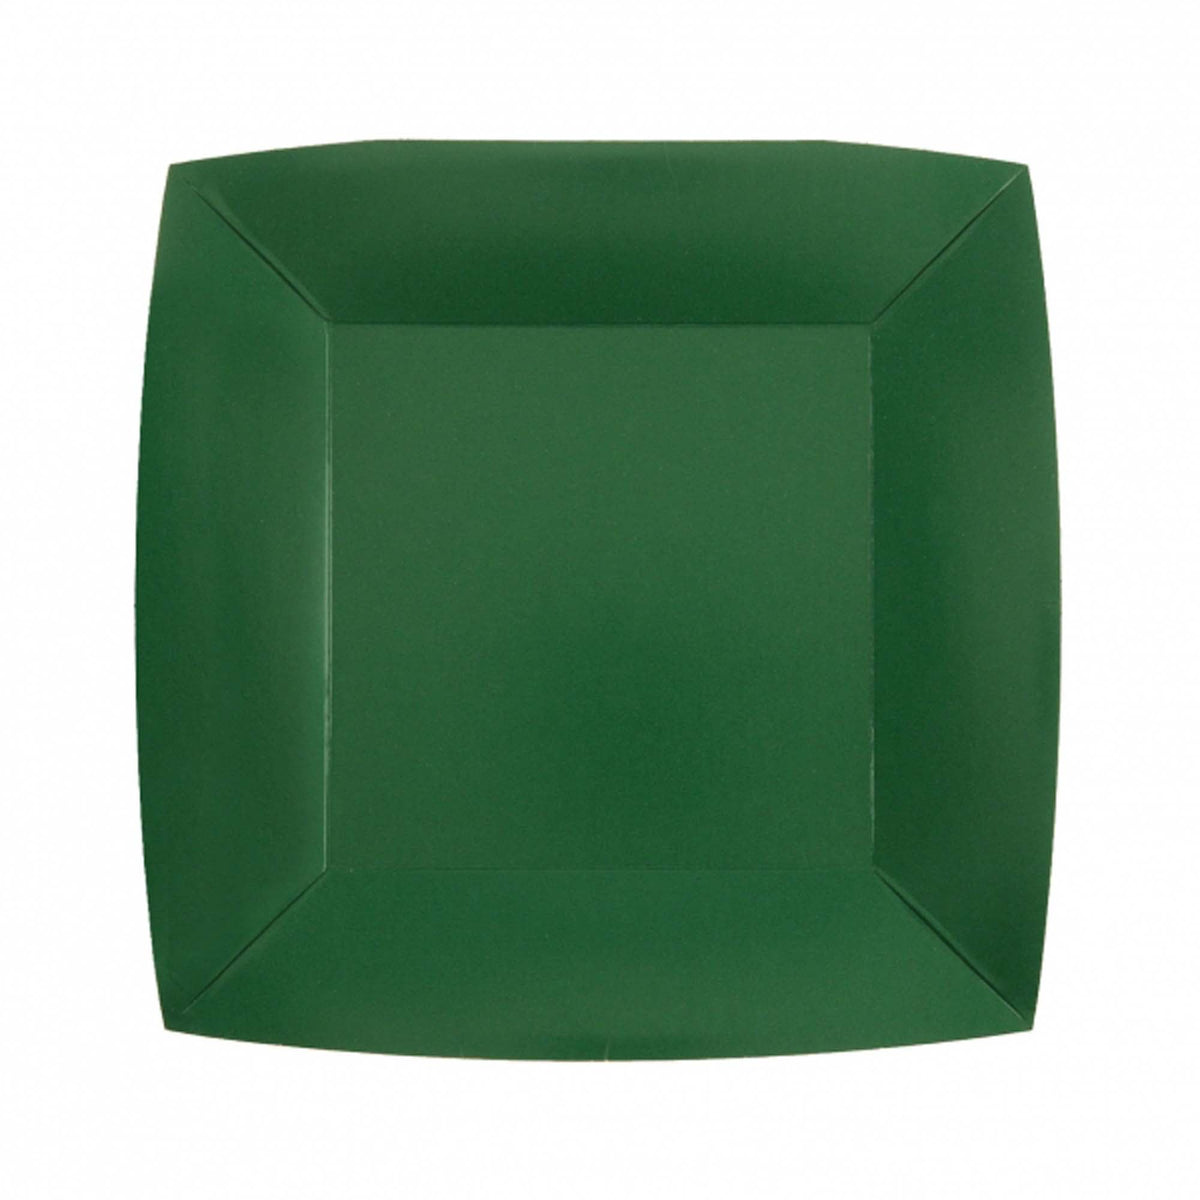 SANTEX Everyday Entertaining Dark Green Small Square Dessert Party Paper Plates, 7 Inches, 10 Count 3660380071815